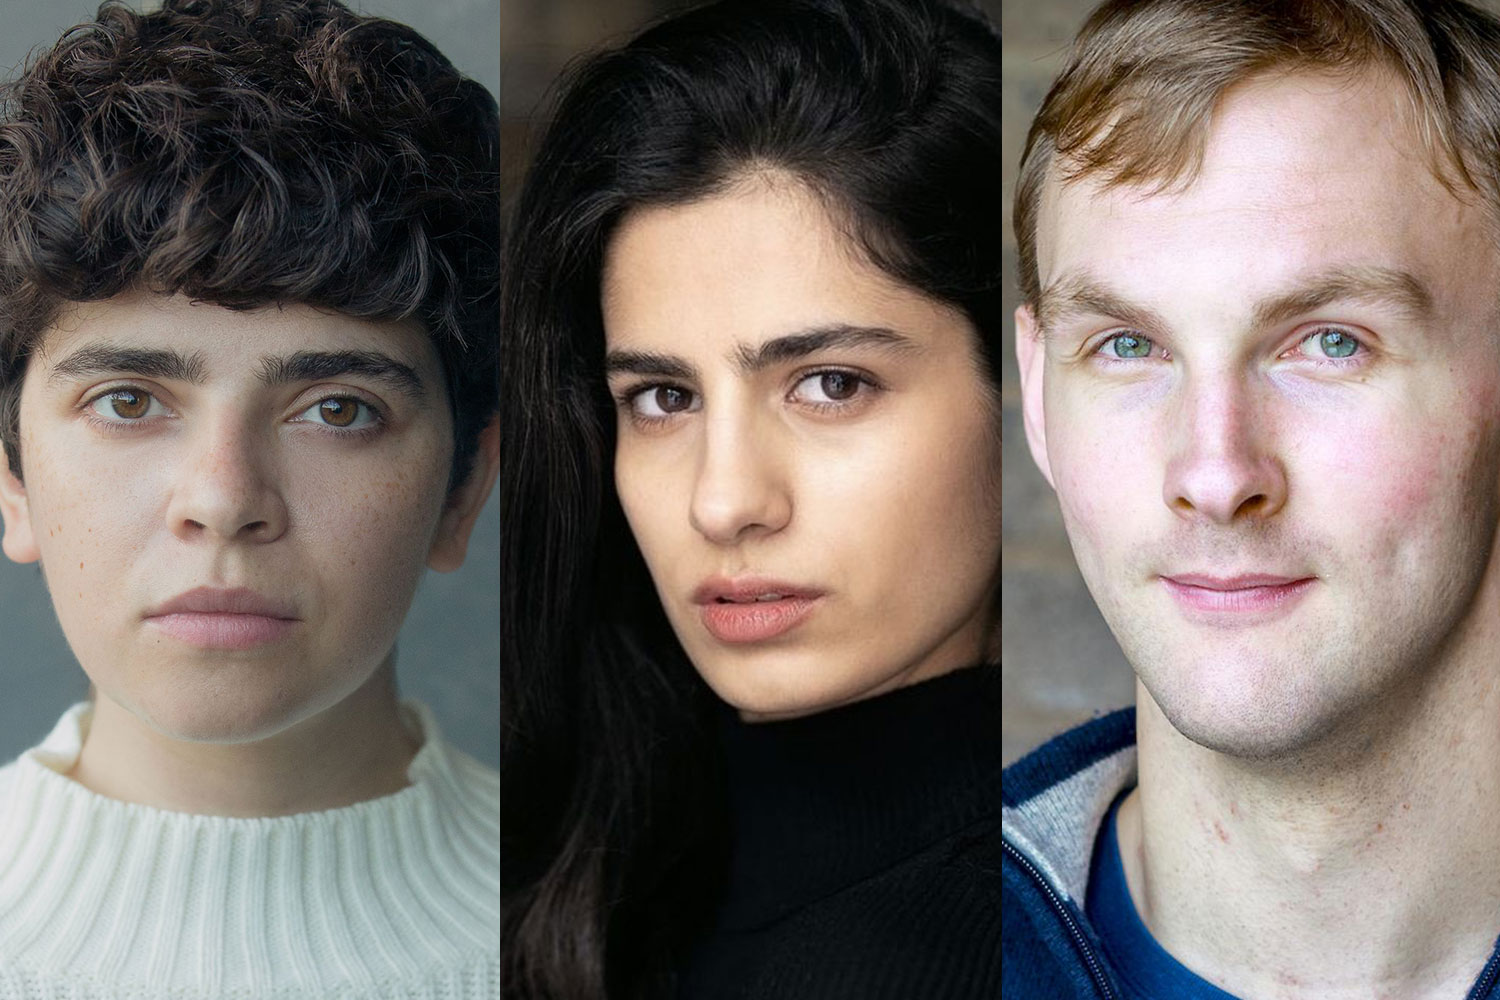 Theo Angel, Hannah Khalique-Brown and Jack Humphrey, headshots supplied by the production